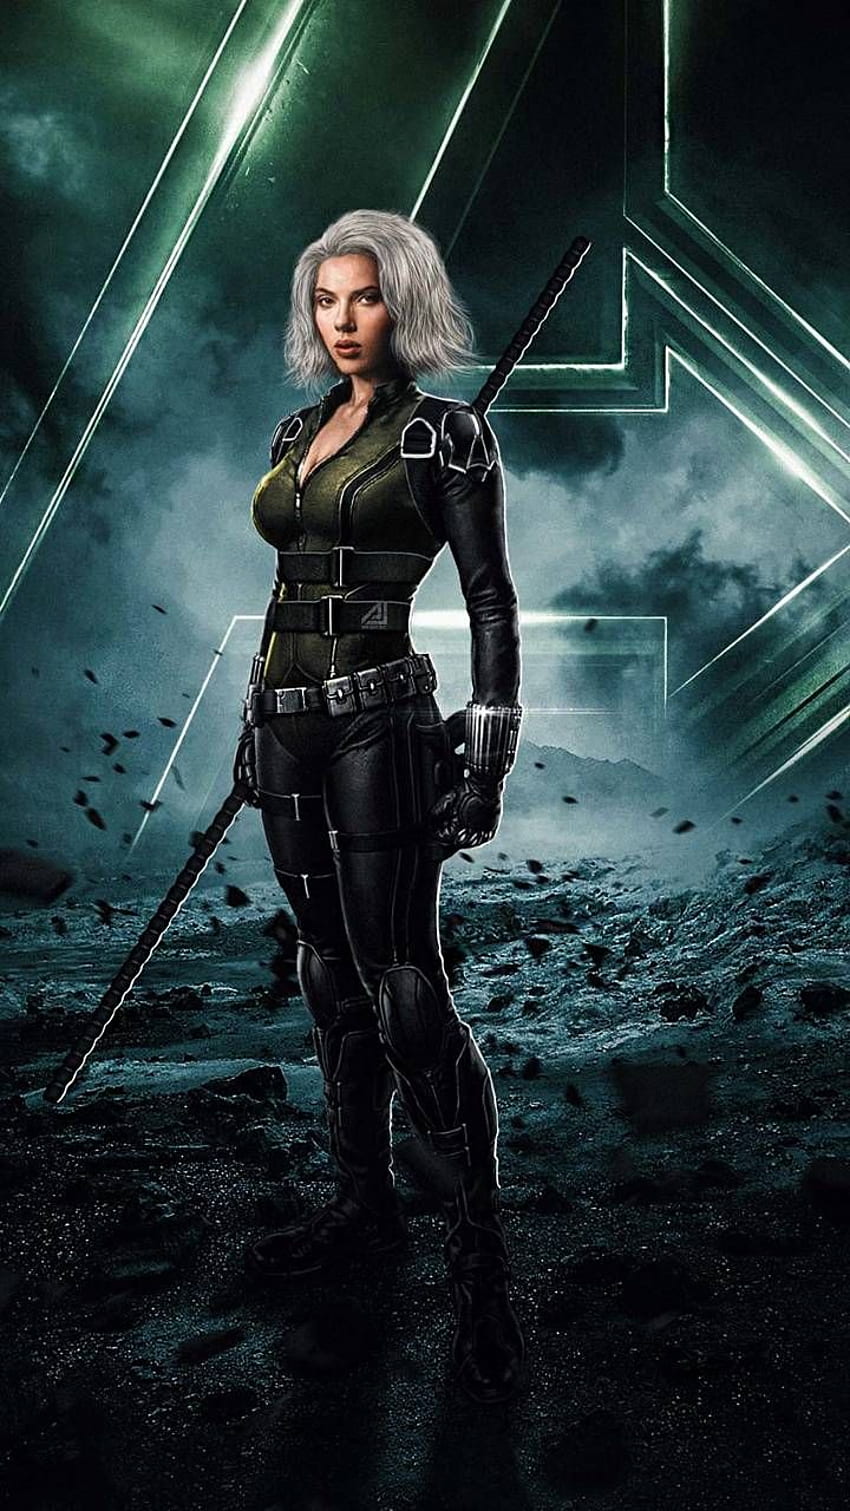 Black Widow for mobile phone, tablet, computer and other devices and wallpape. Black widow marvel, Black widow , Black widow film, Black Widow Gaming HD phone wallpaper